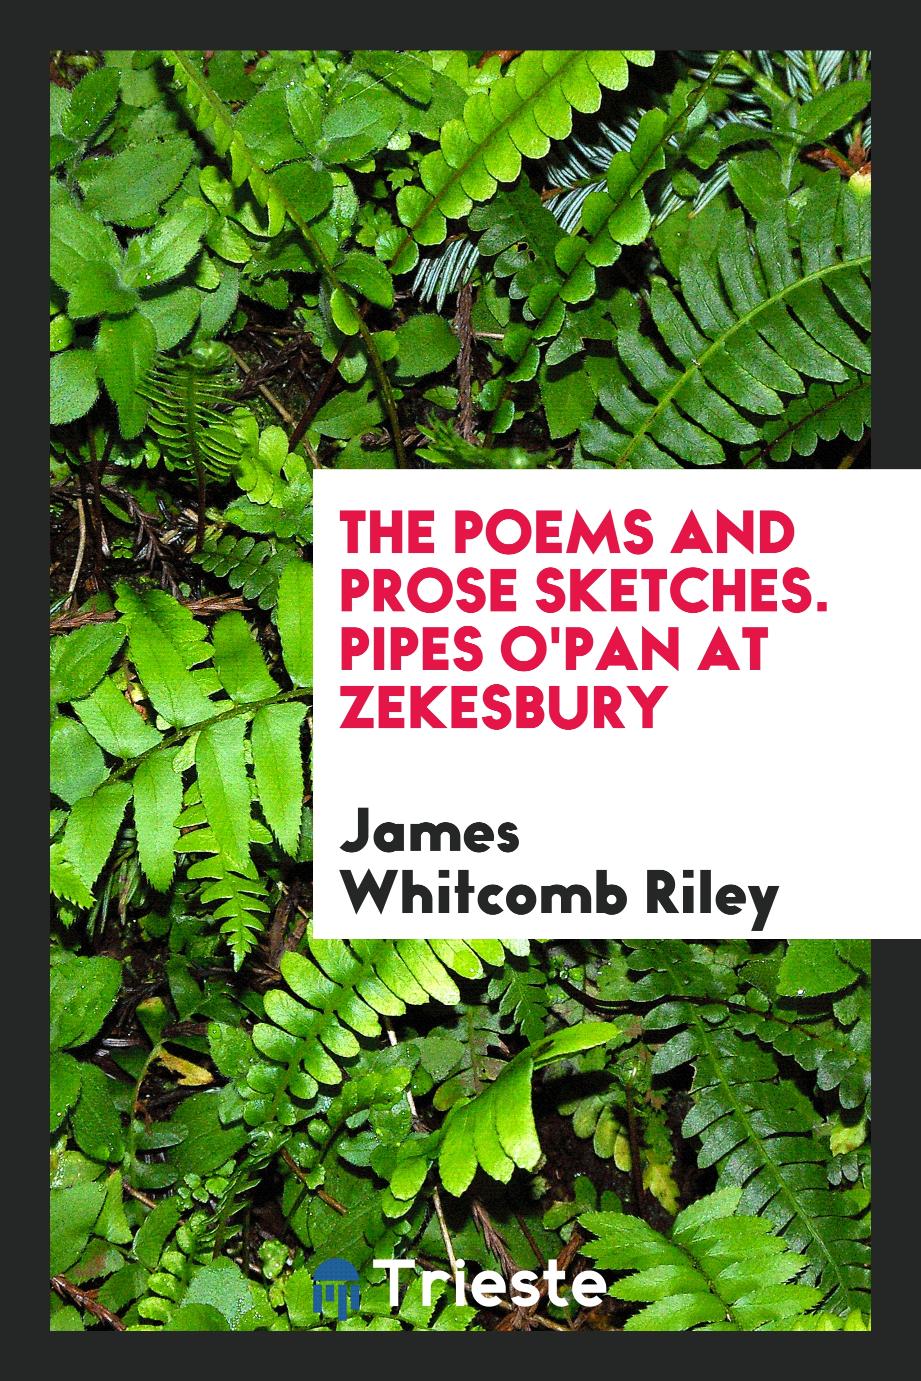 The poems and prose sketches. Pipes O'Pan at Zekesbury